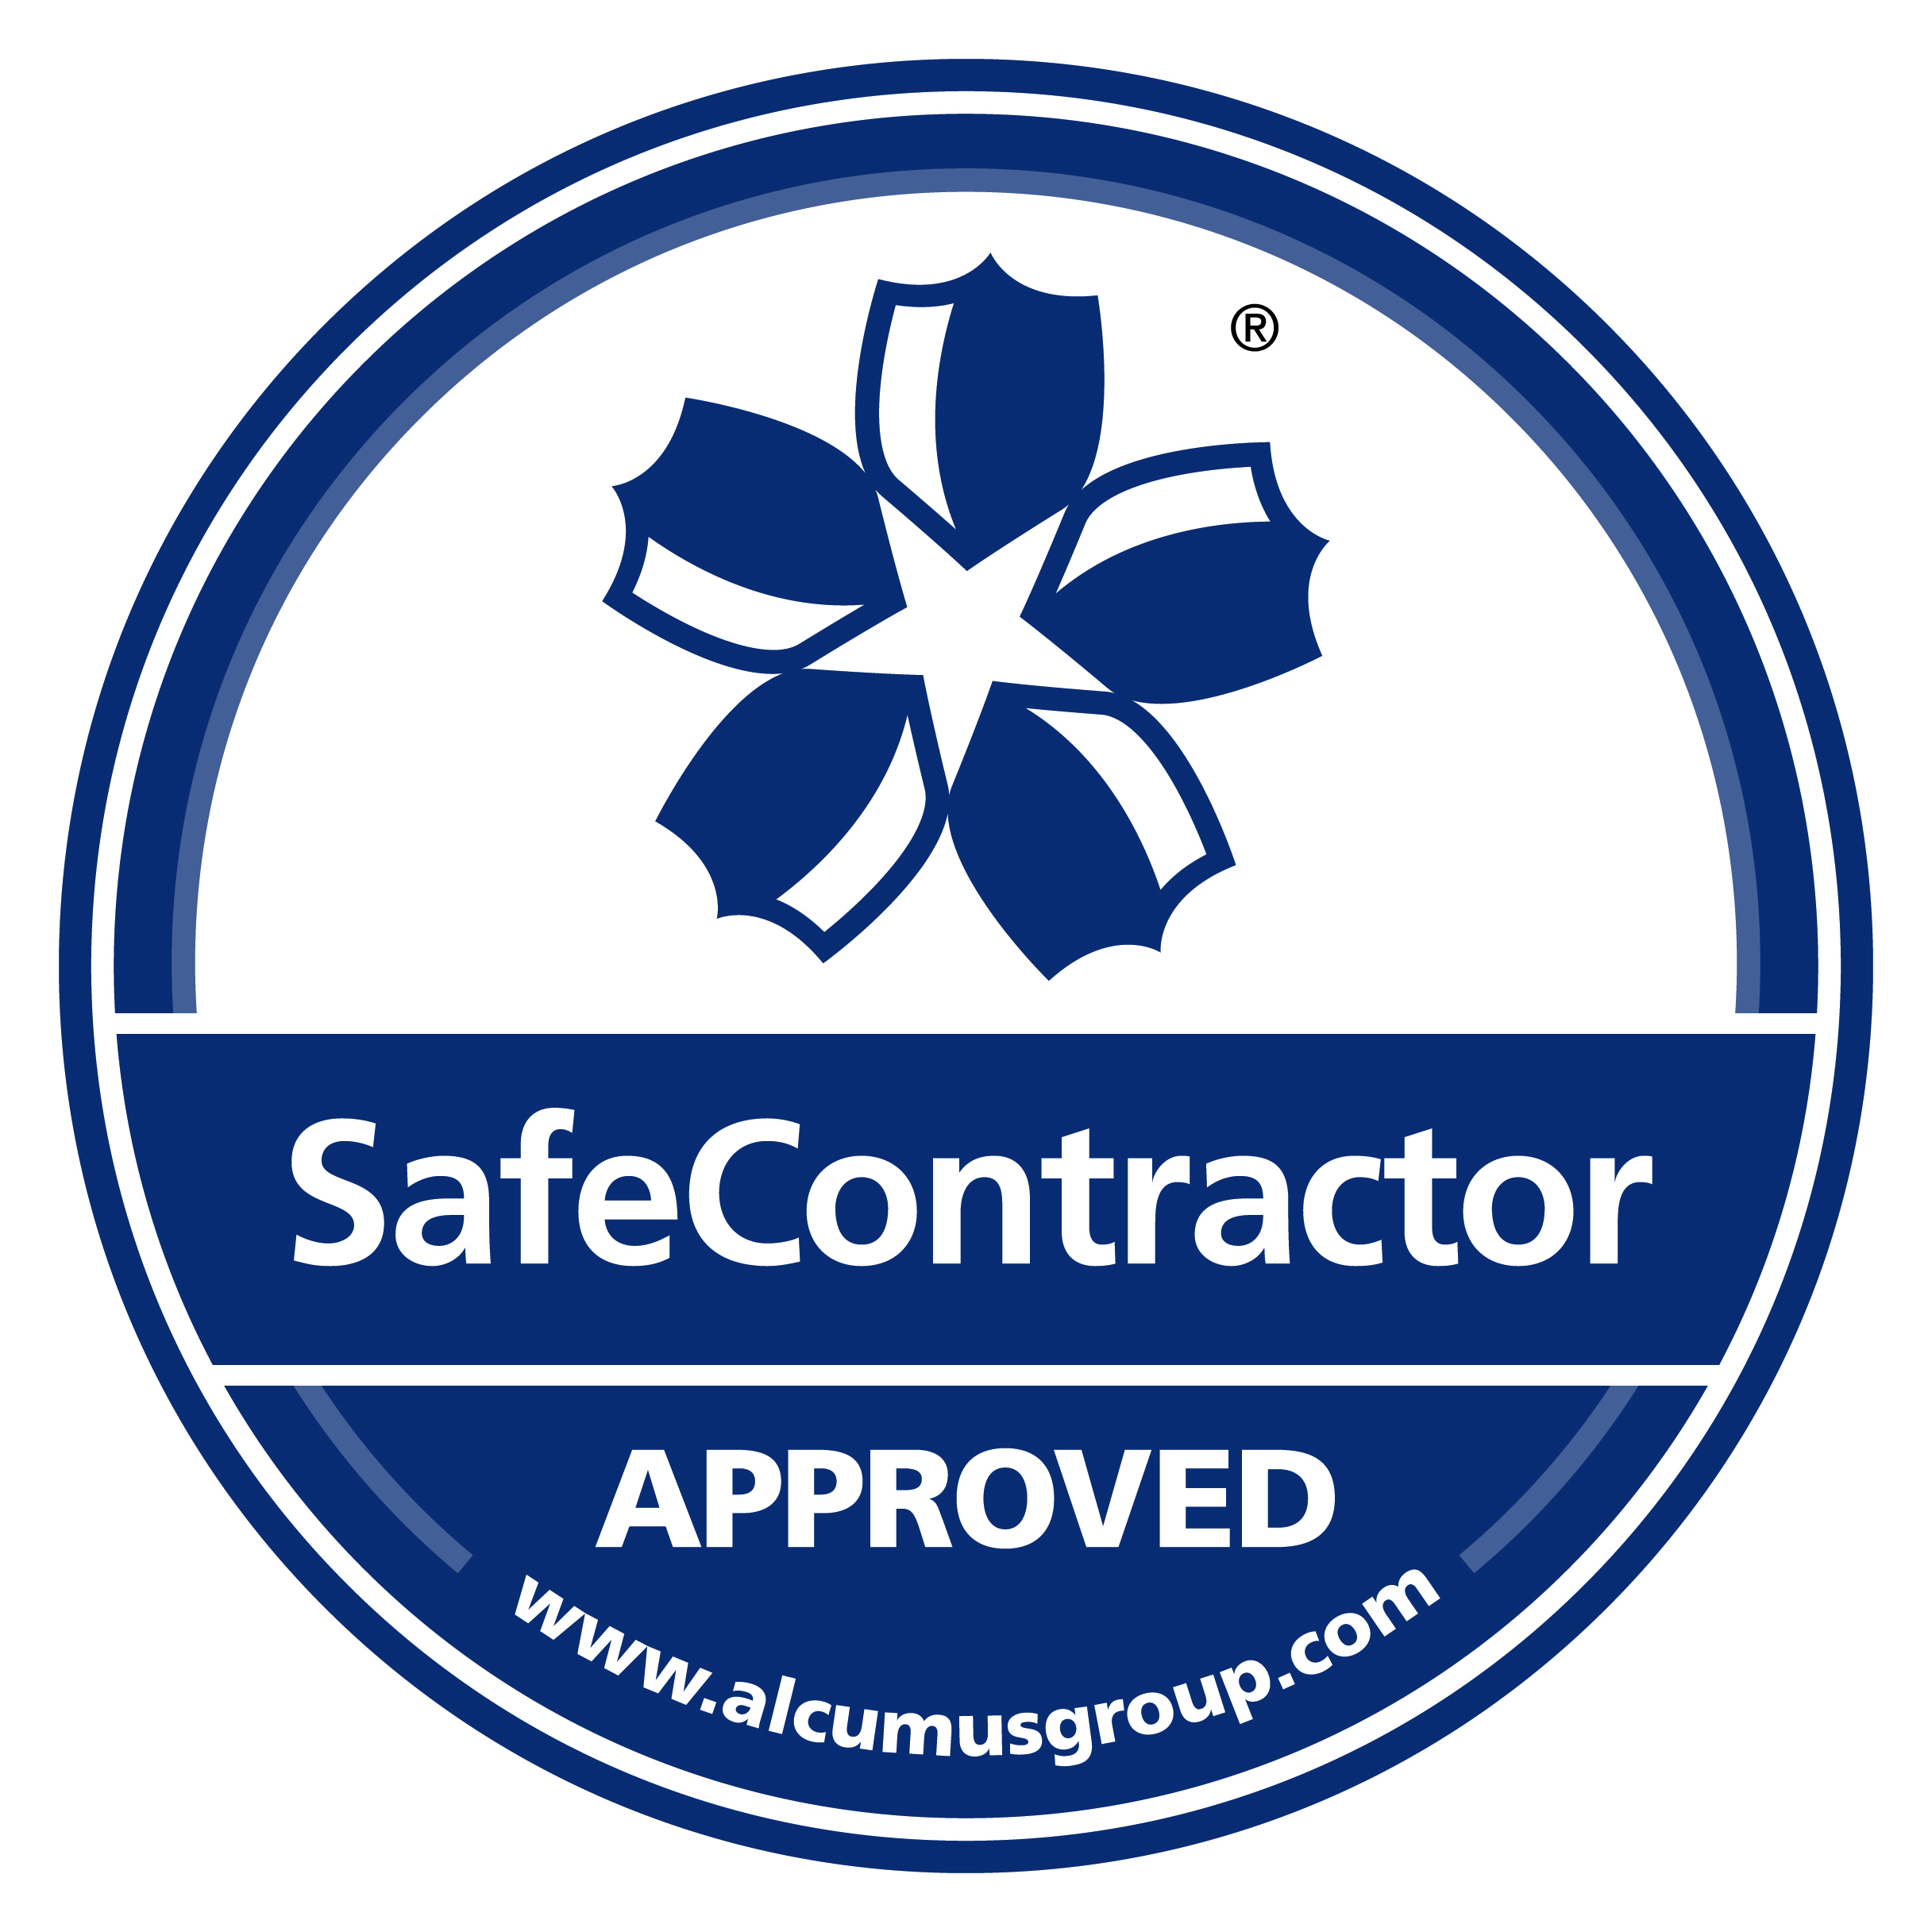 Safecontractor safe contractor approved hythe building services